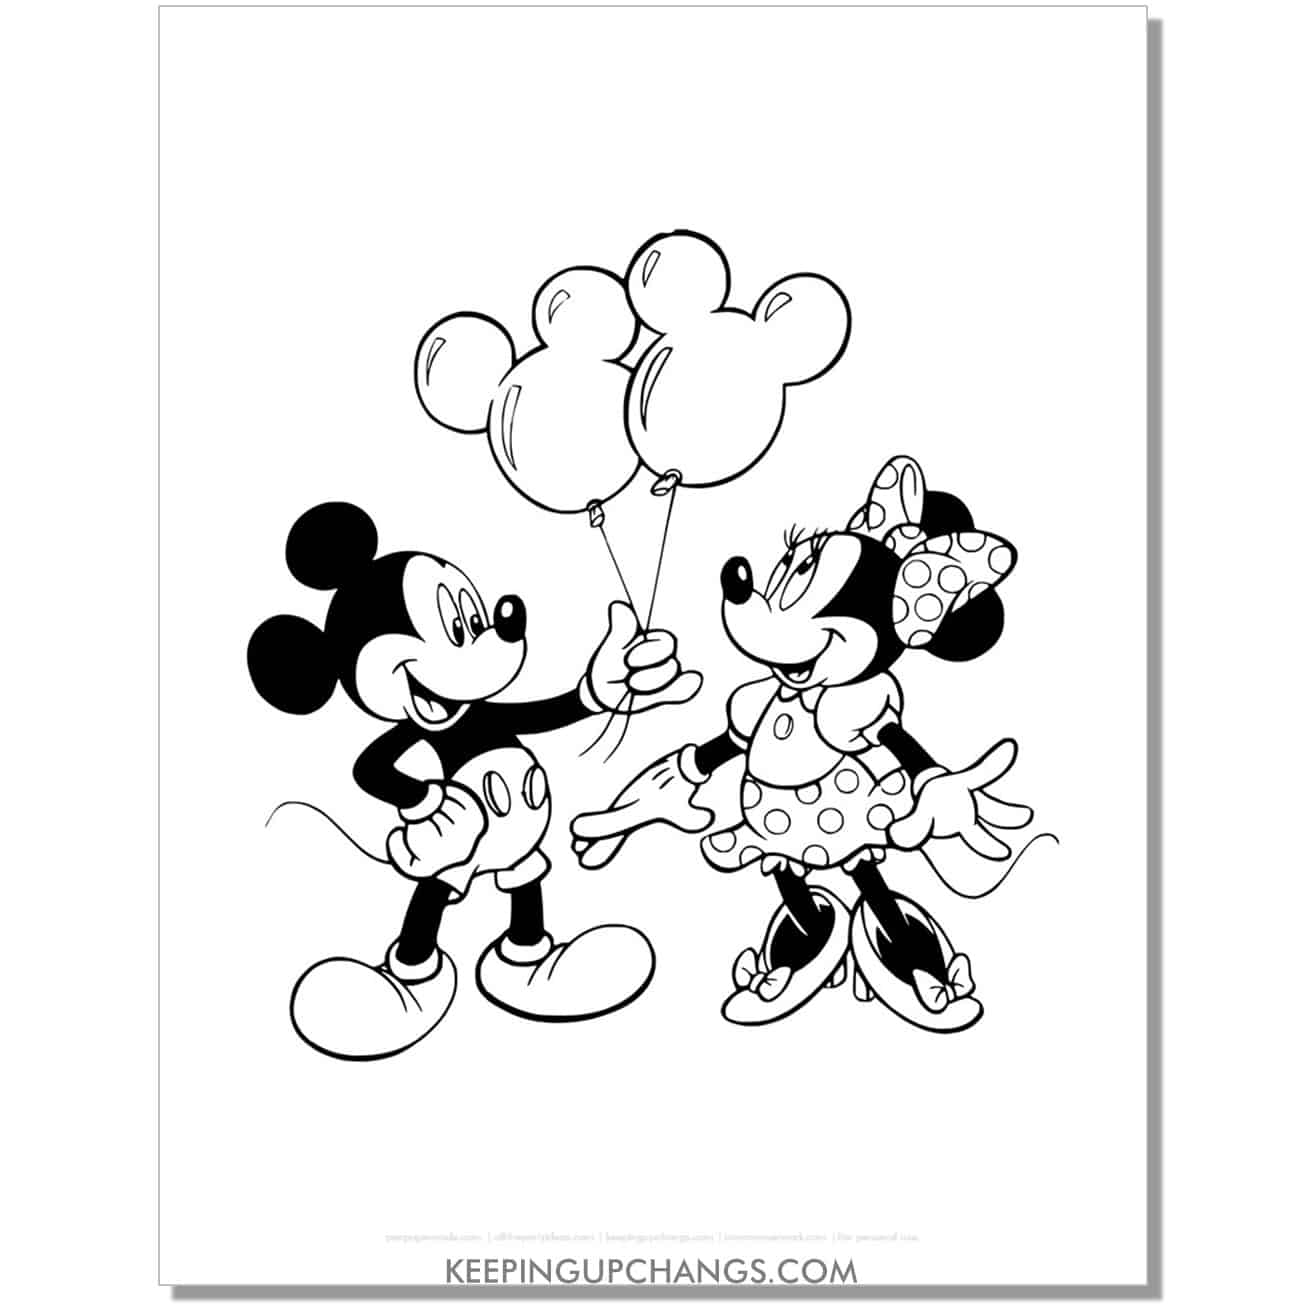 free mickey gives minnie mouse balloons coloring page, sheet.